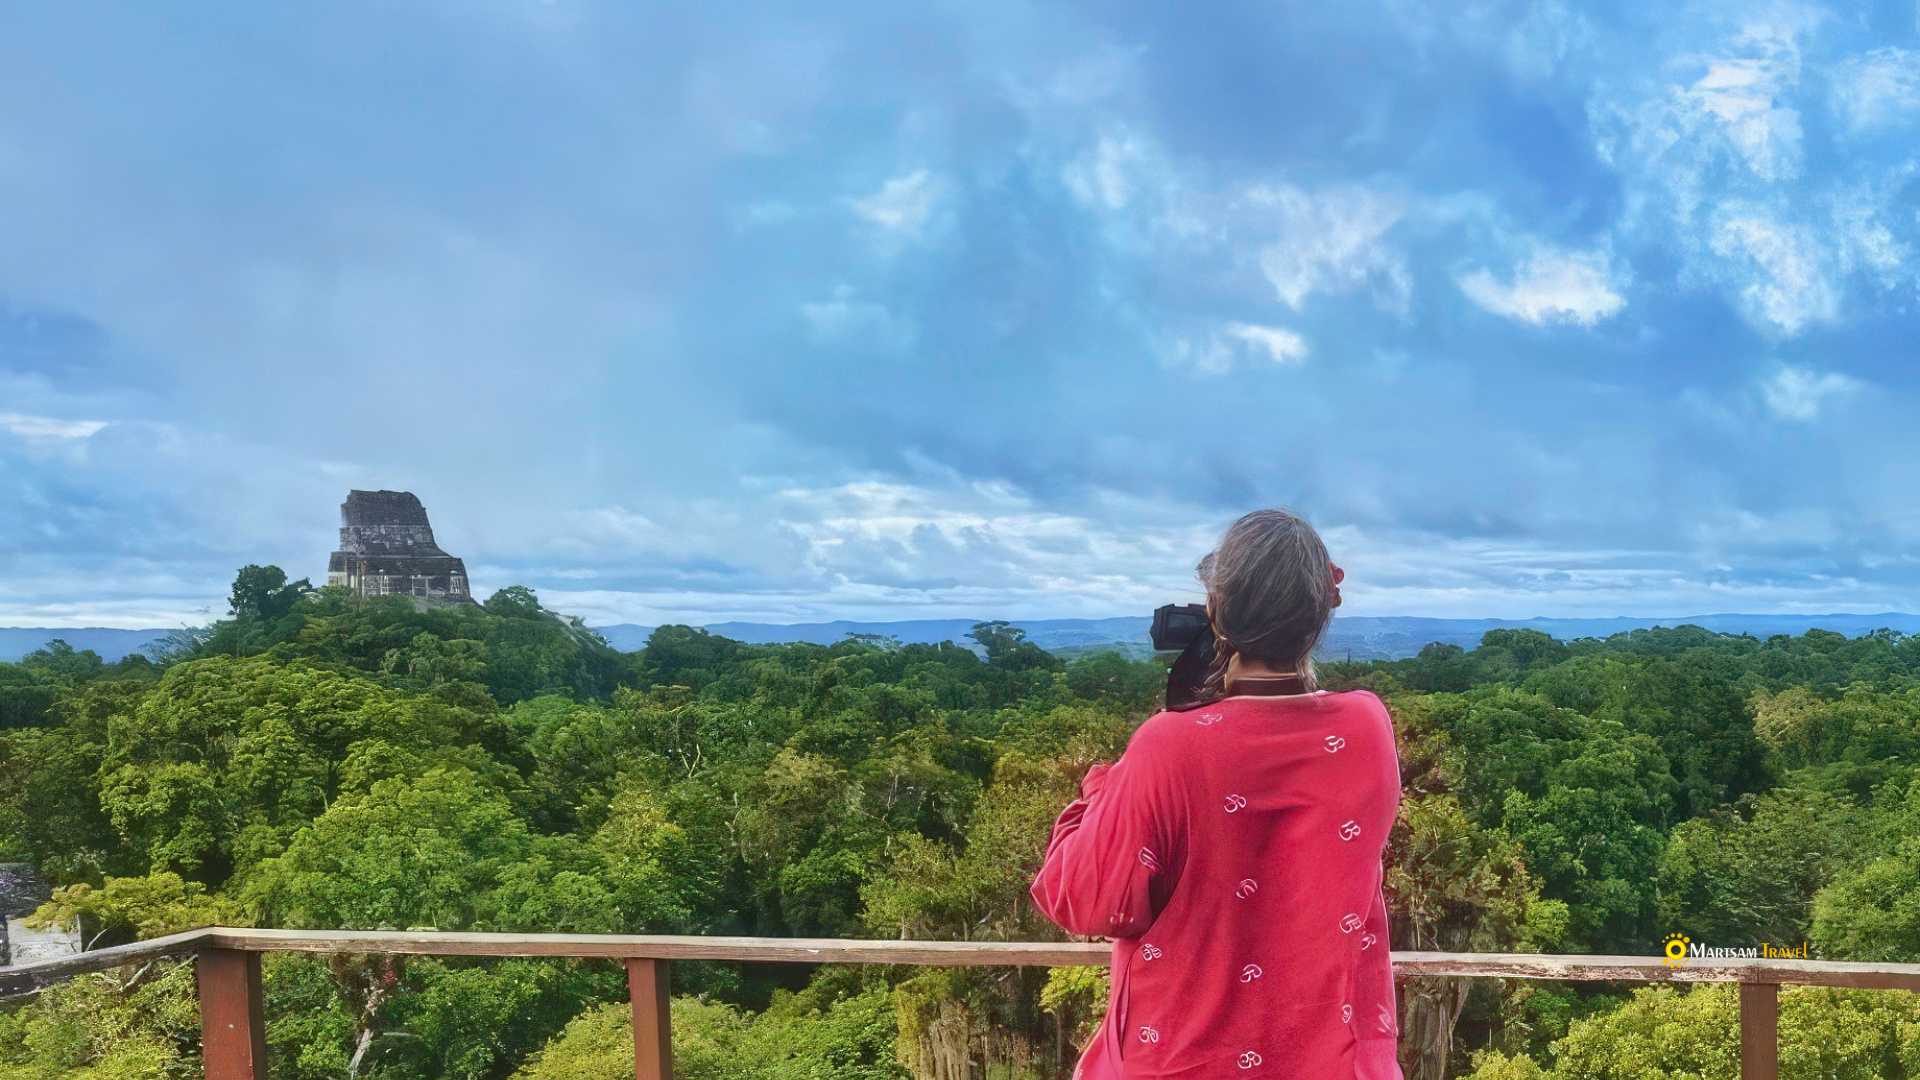 Lady atop a Mayan pyramid at Tikal, gazing over the vast tropical forest canopy, with ancient temples rising majestically amidst the tranquility.